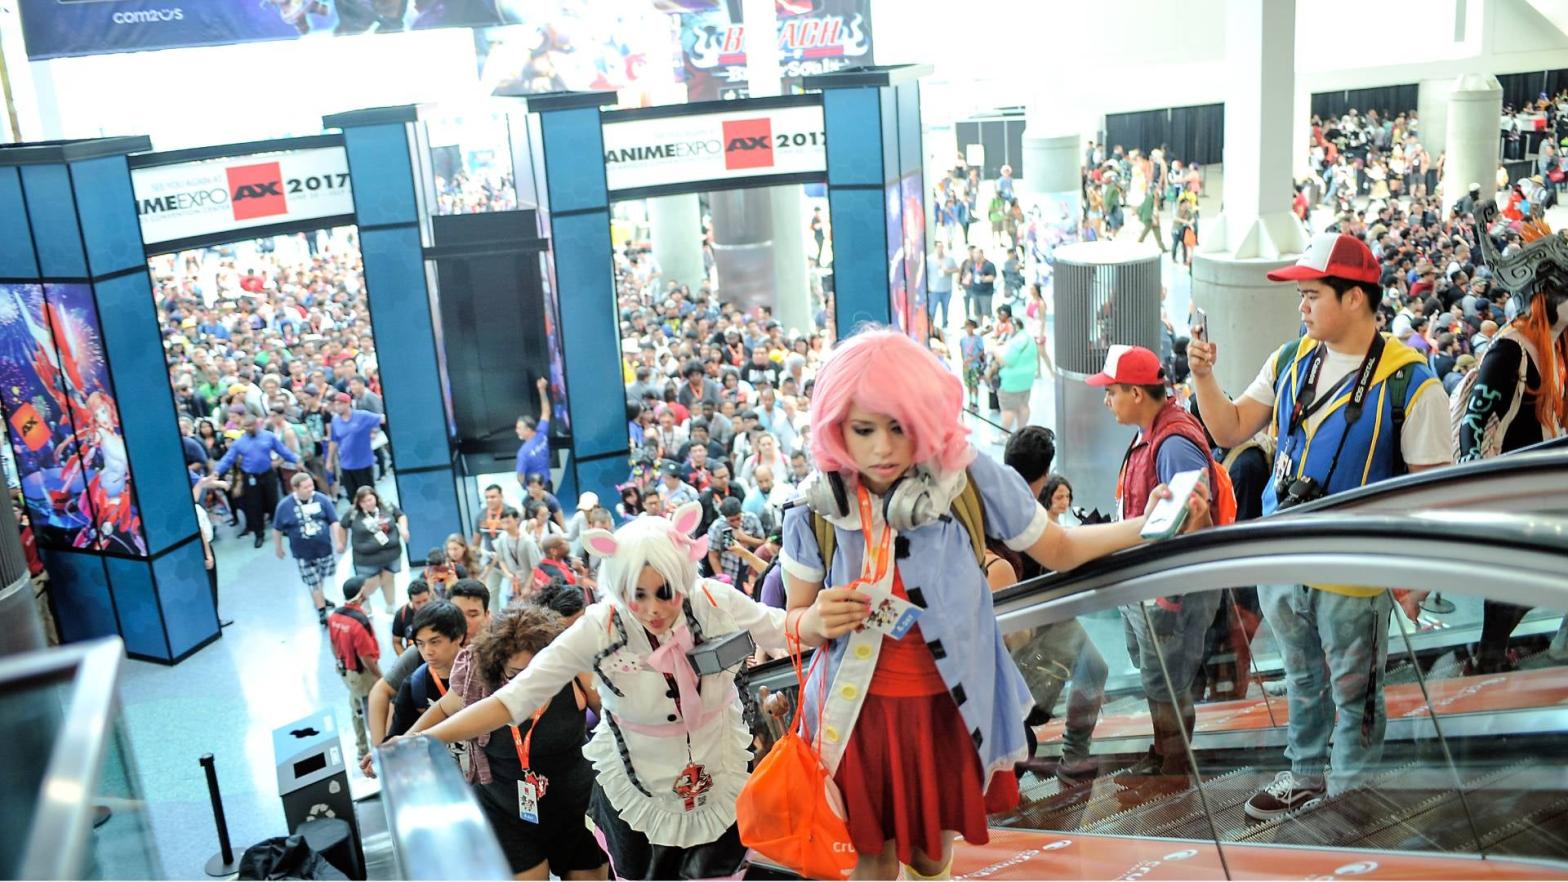 This scene from Anime Expo 2017 shows the floor gets pretty densely packed. (Photo: Renard Garr, Getty Images)